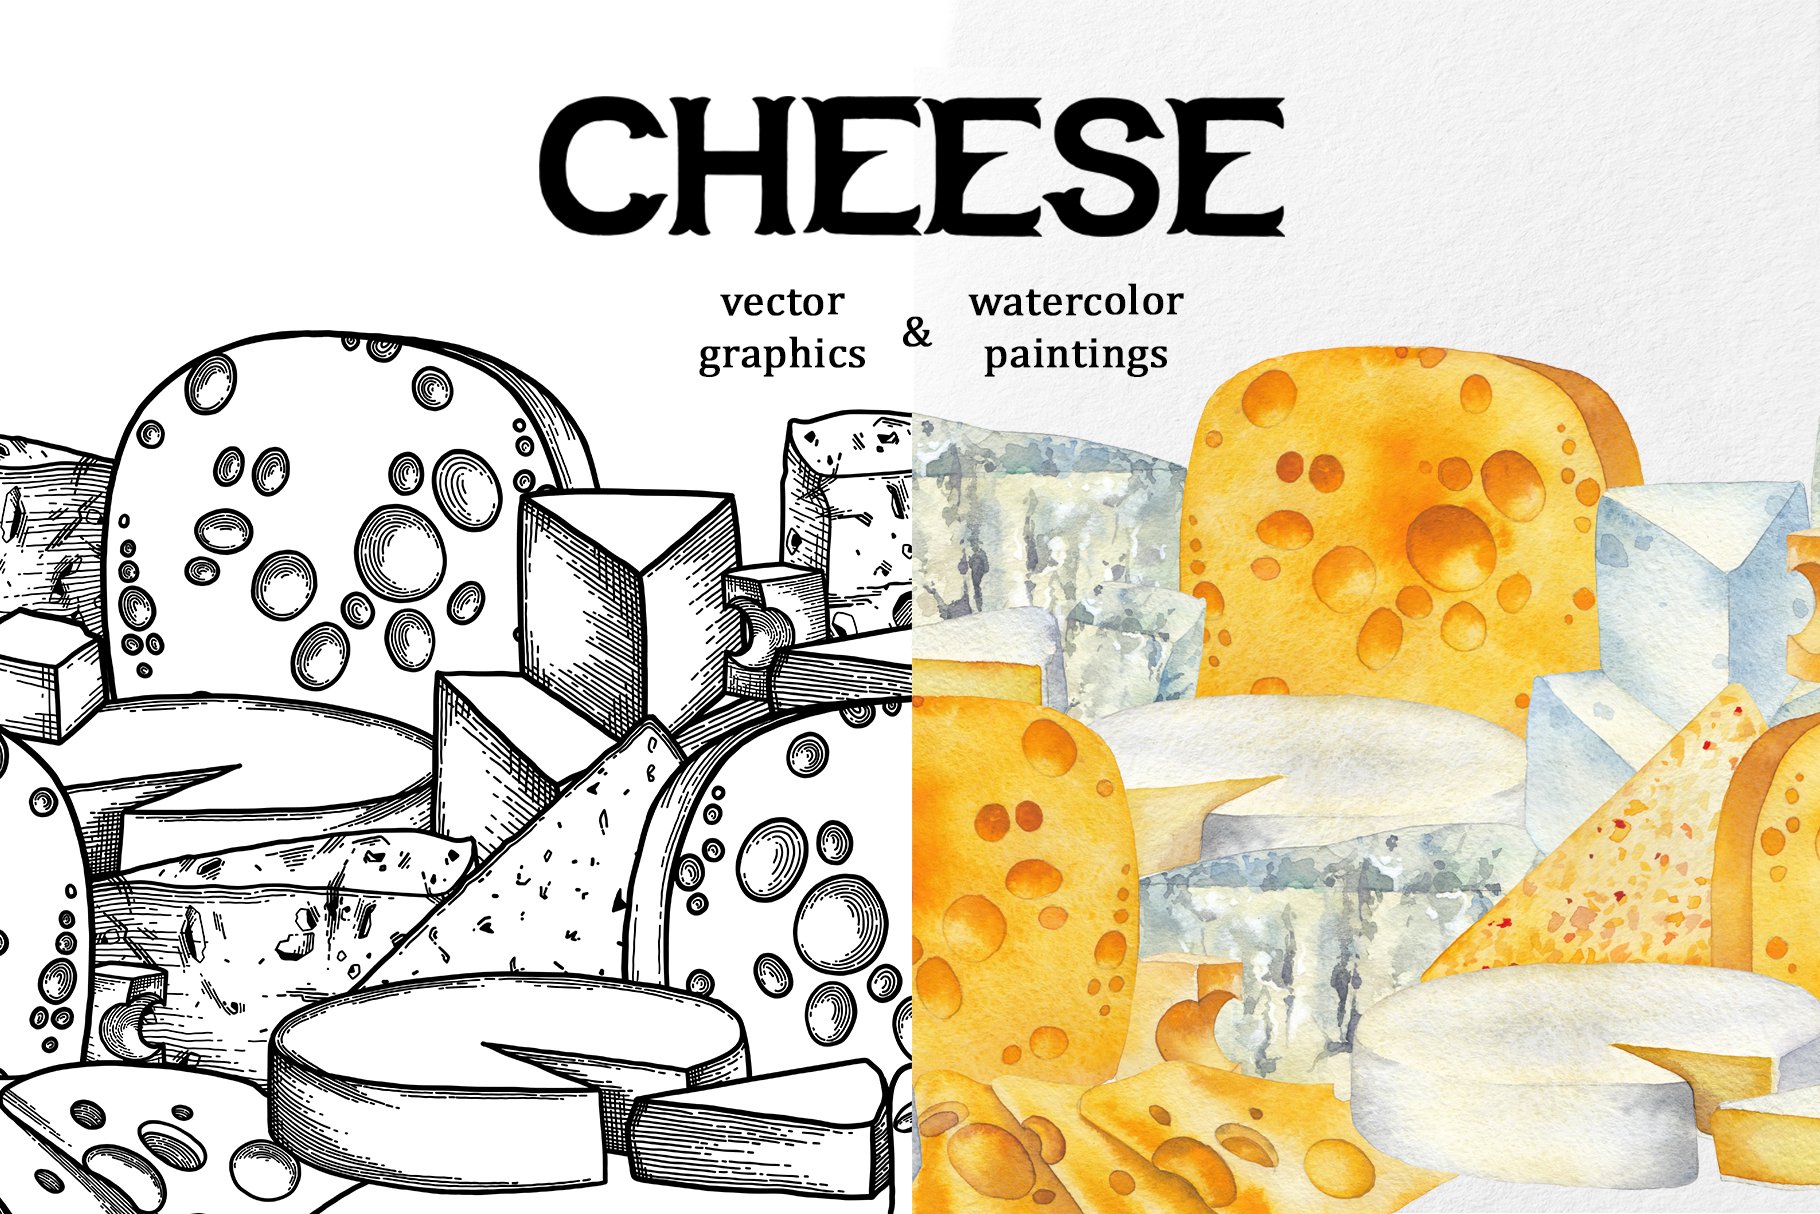 Pack of colorful vector and watercolor images of various types of cheese.